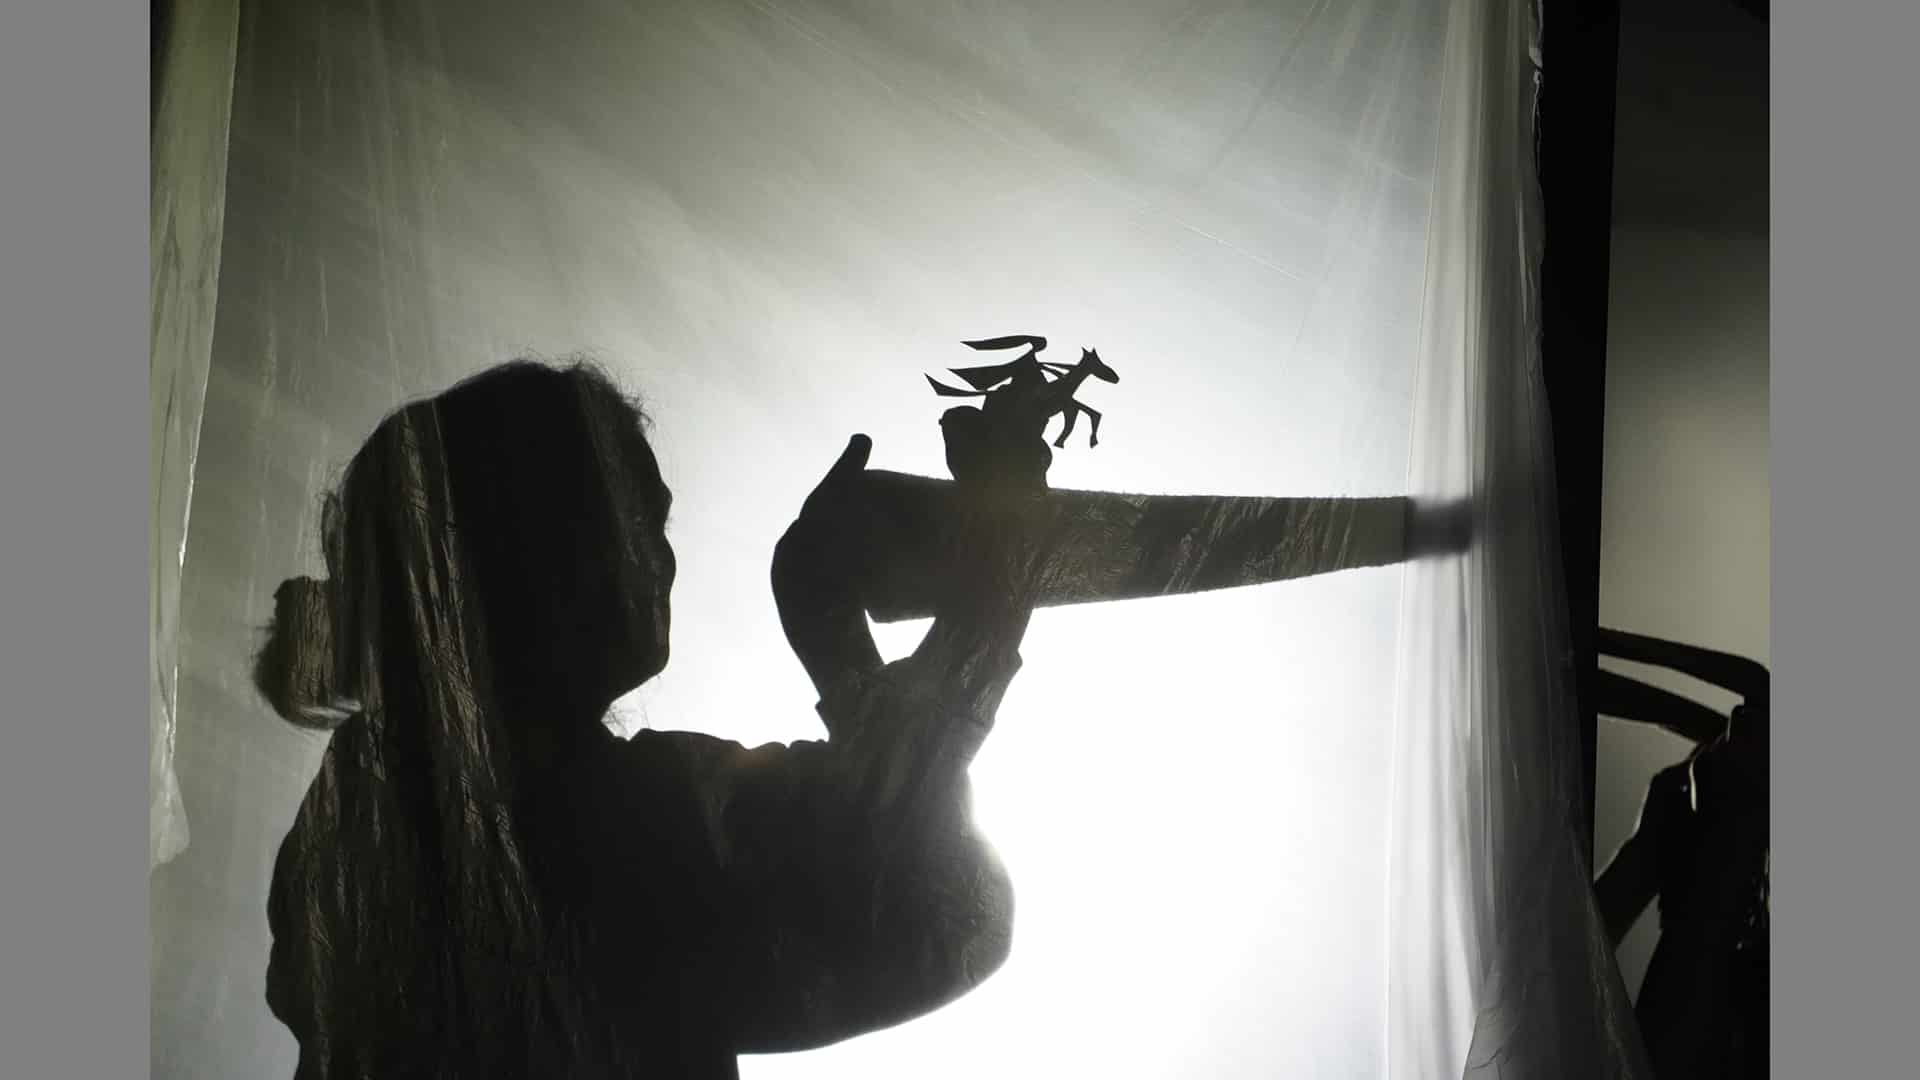 Shadowpuppet scene featuring a figure riding a galloping horse